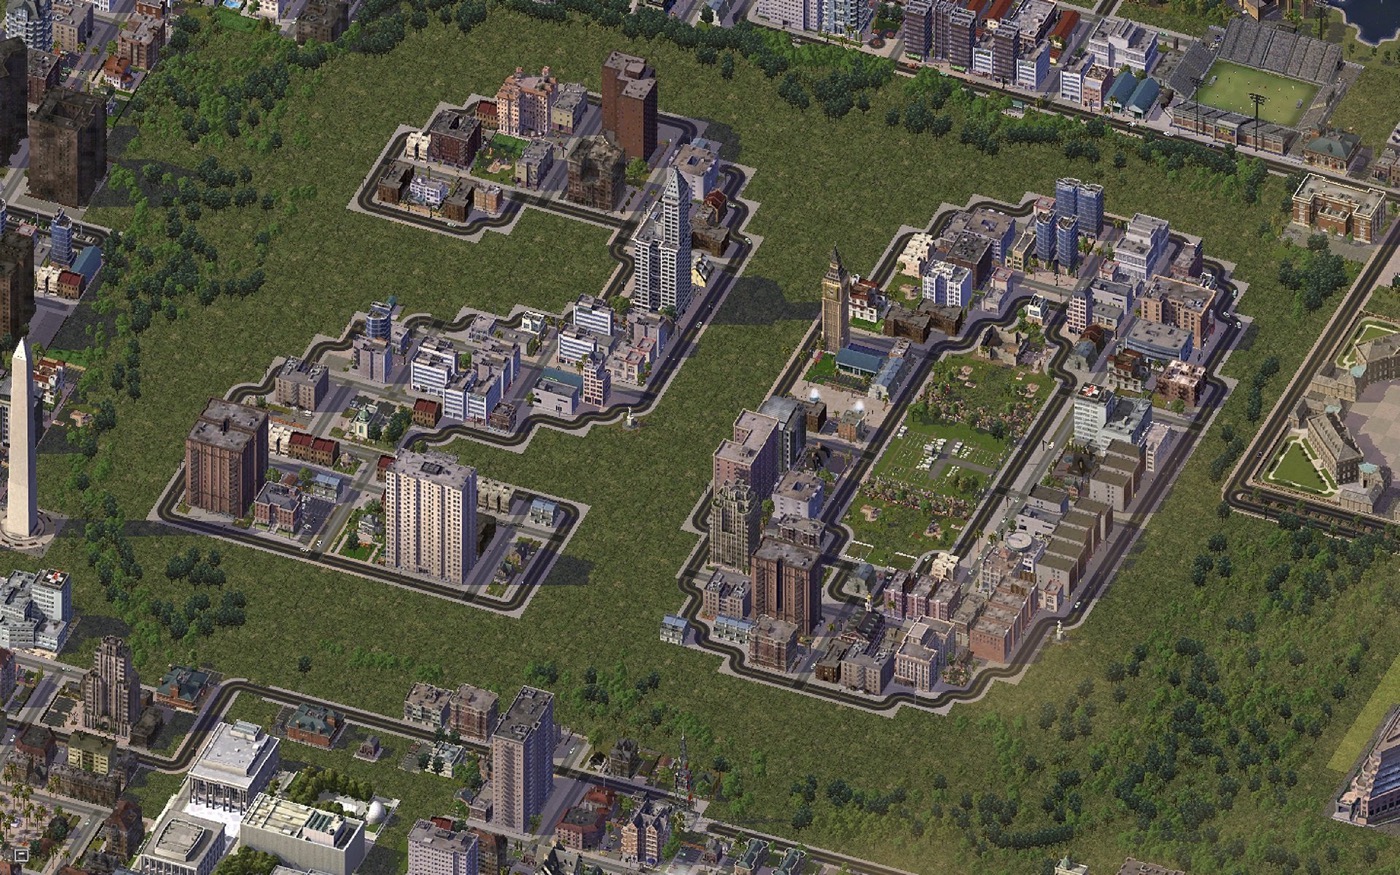 SimCity 4 starts natively supporting Apple Silicon Macs